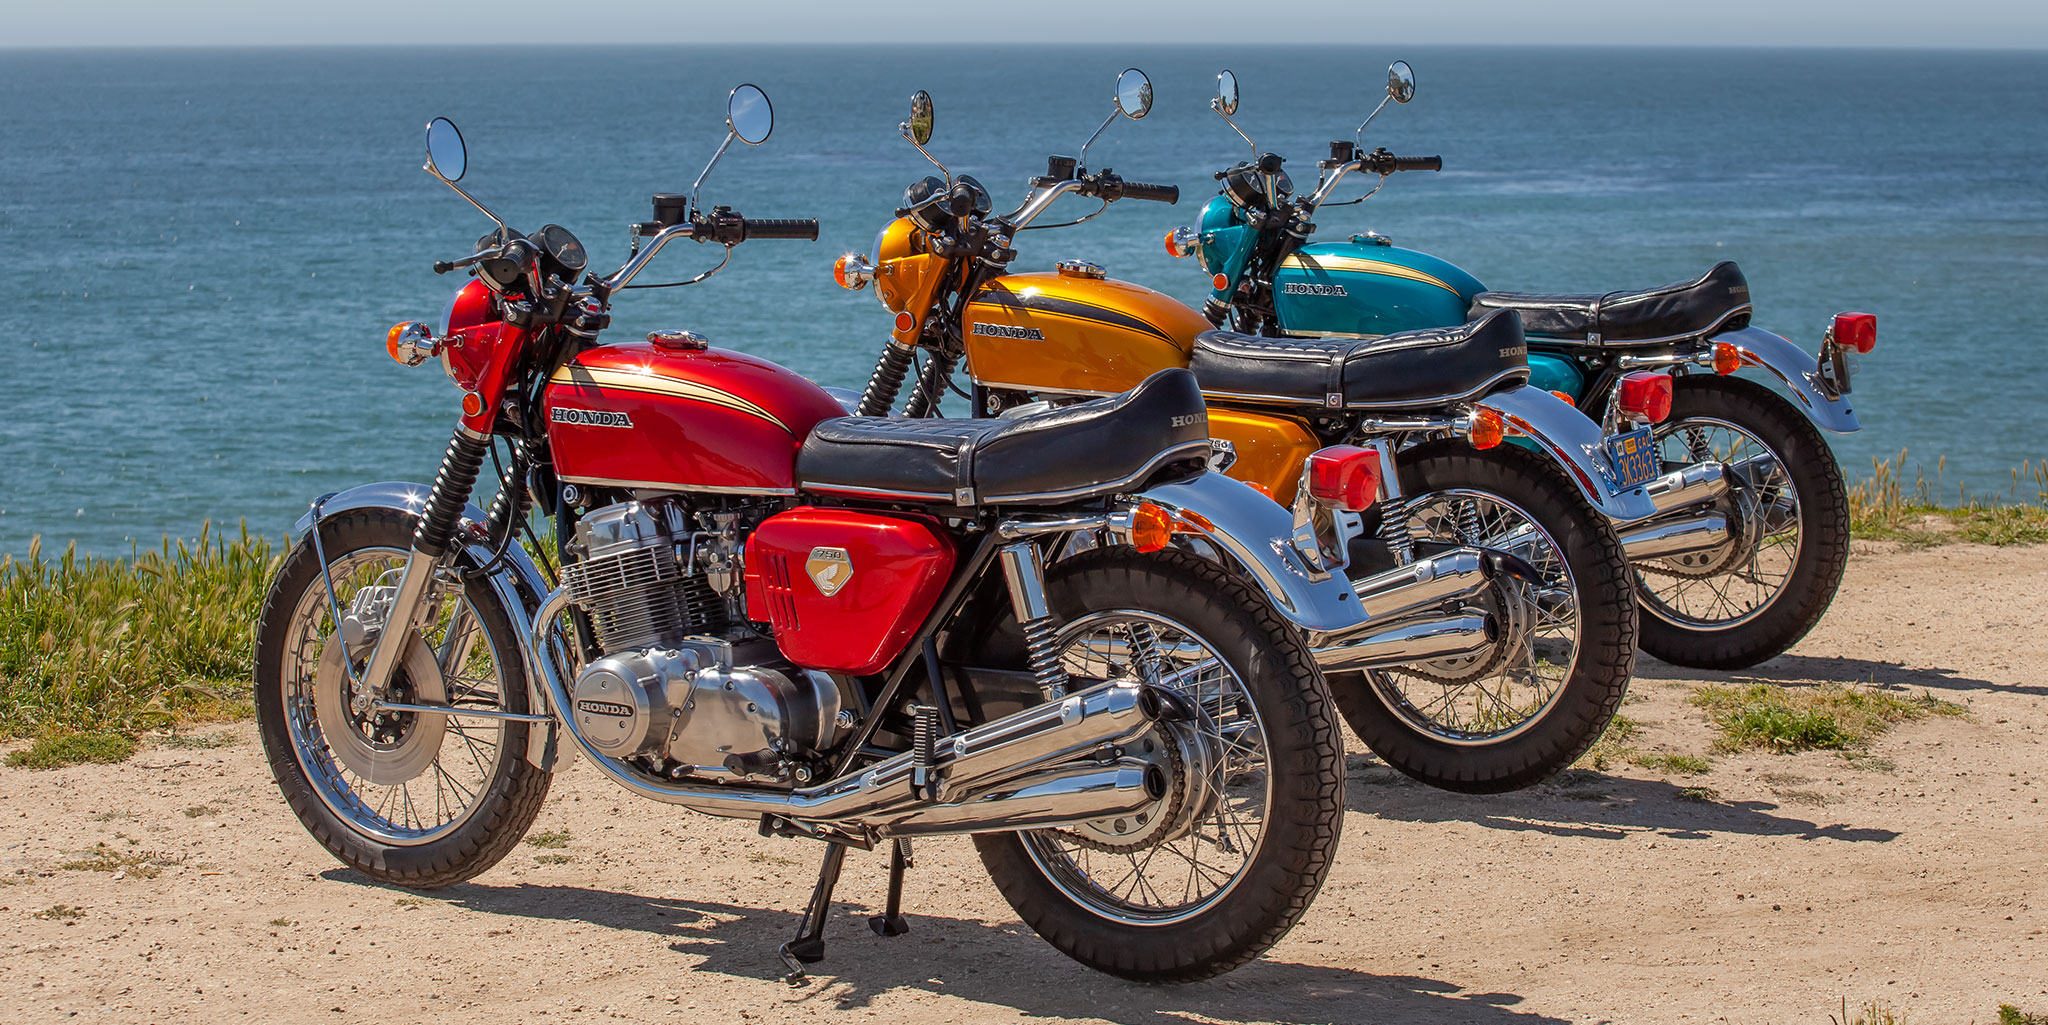 The three 1969 CB750s that I brought to the Quail in 2019